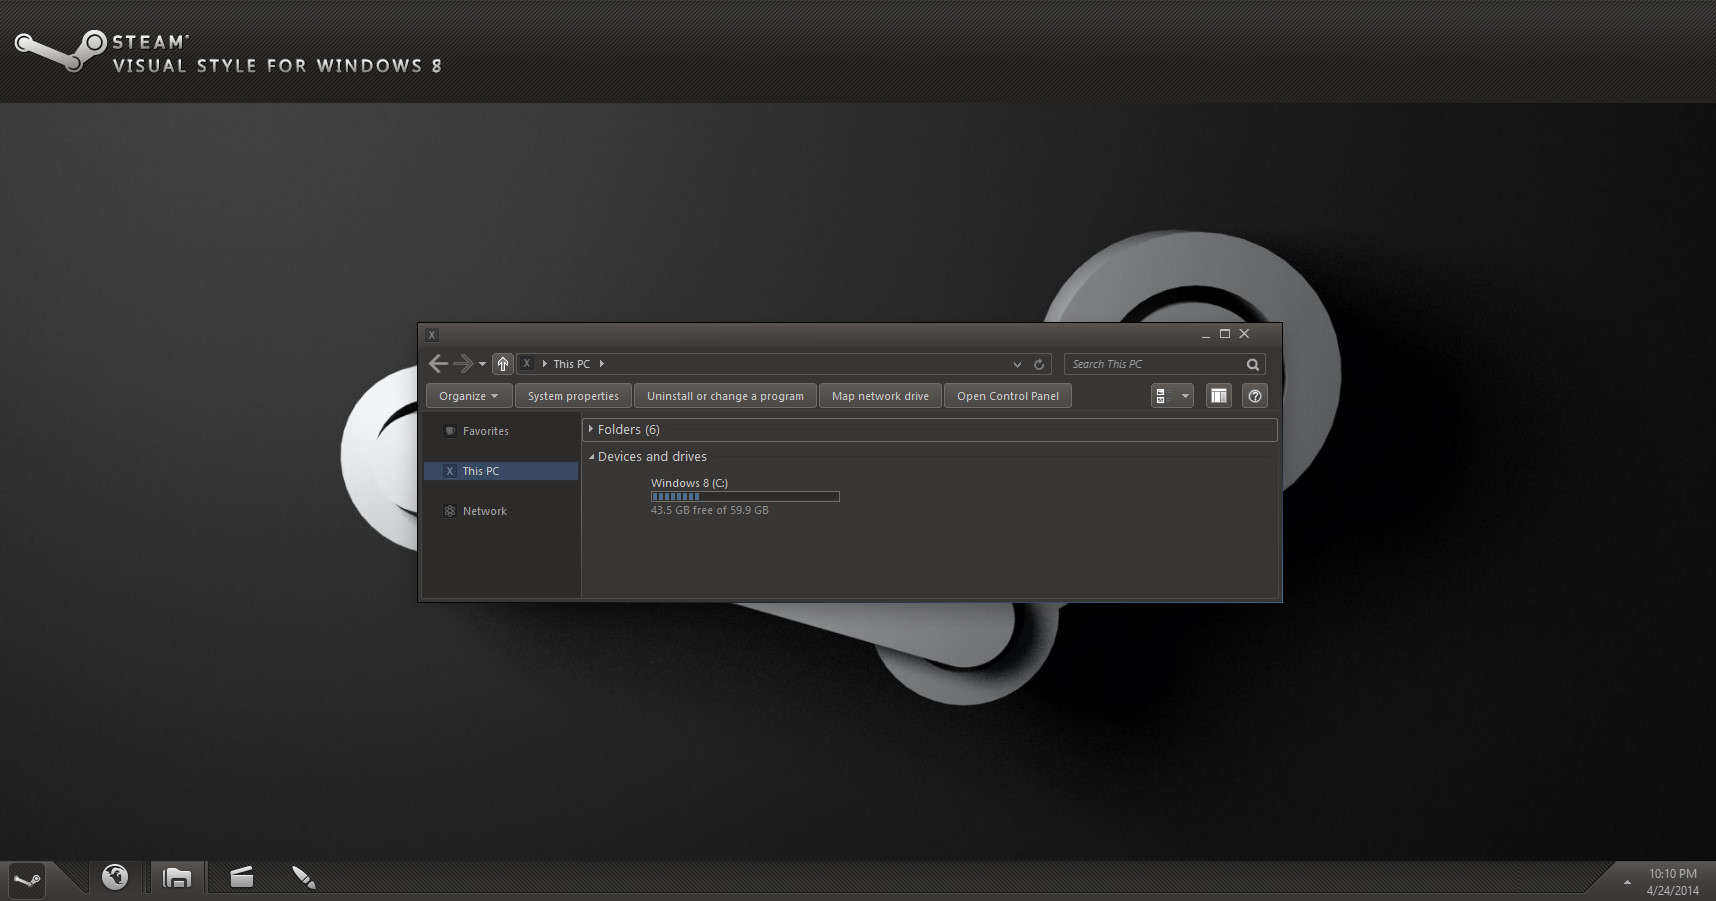 Steam Vs For Windows By Neiio Customization Skins Themes